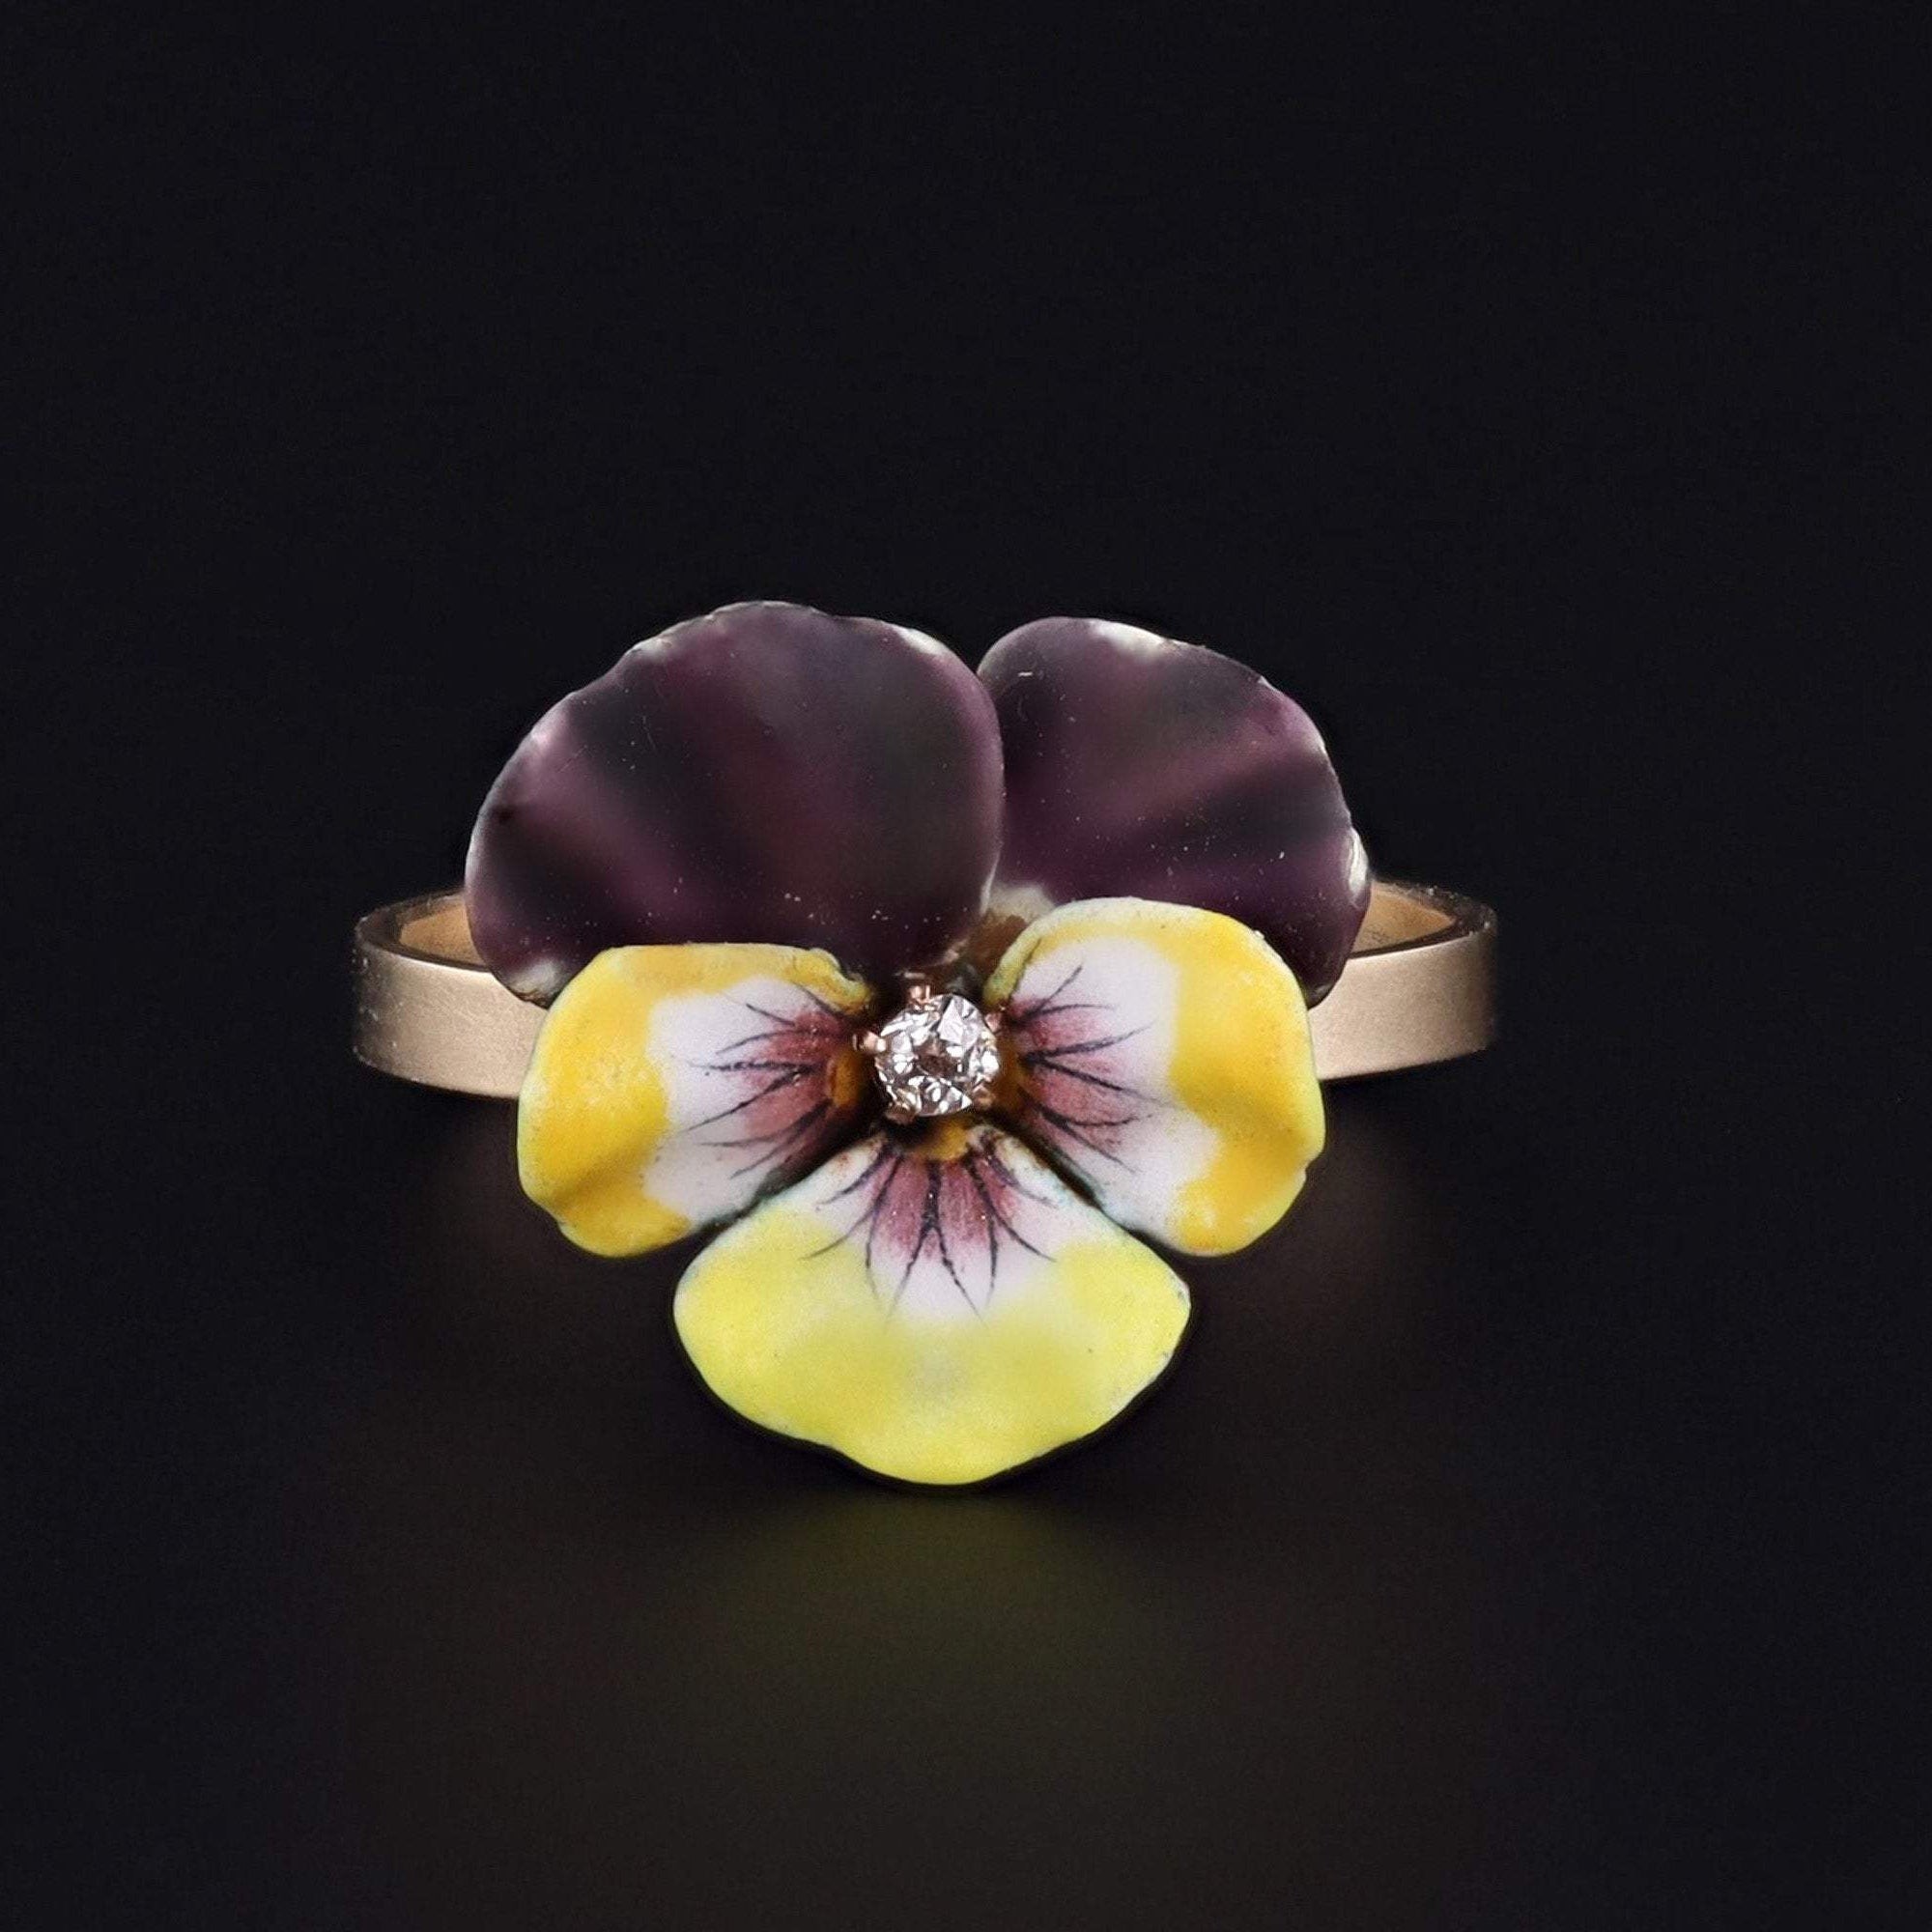 14k Gold Enamel Pansy Ring | Purple and Yellow Pansy Ring | Antique Pin Conversion Ring | 14k Gold Flower Ring | Diamond Flower Ring